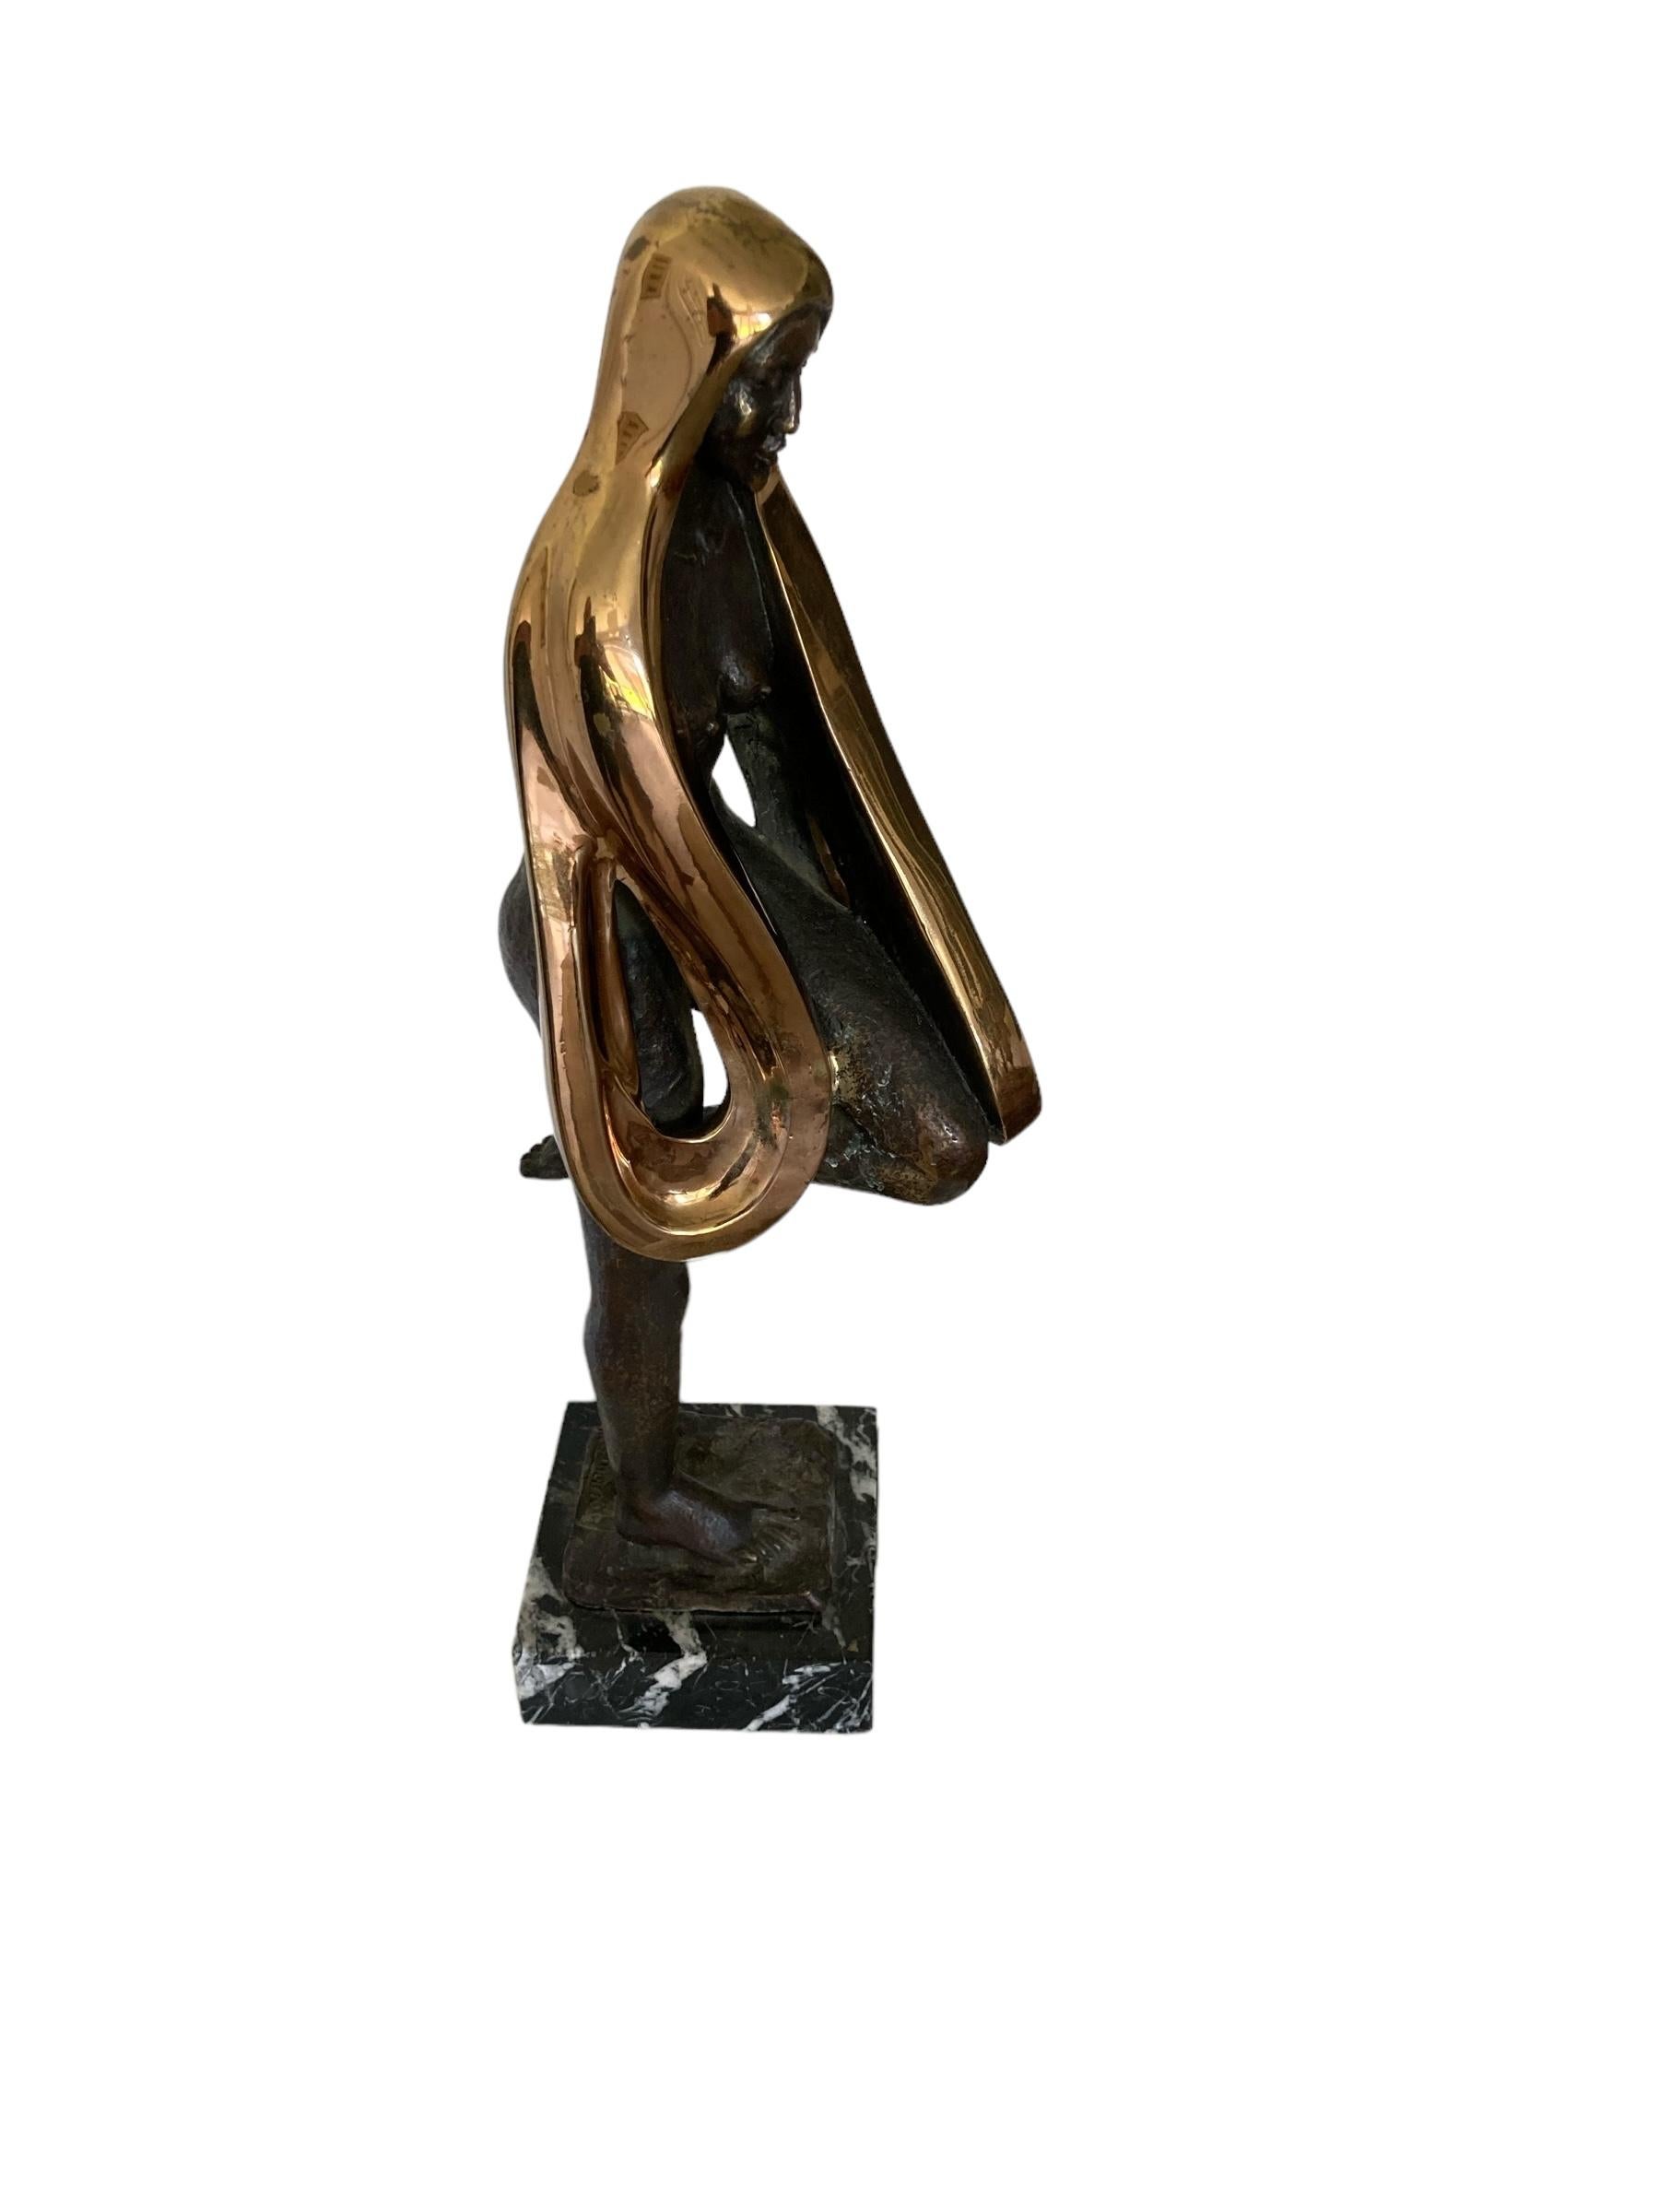 A Beautiful Bronze Sculpture with Golden decor of Naked Women on marbel base Titled 'Libelula' by Jose Manuel with signature plaque and moulded name on statue. This elegant but imposing sculpture has unusal features with the naked women standing on